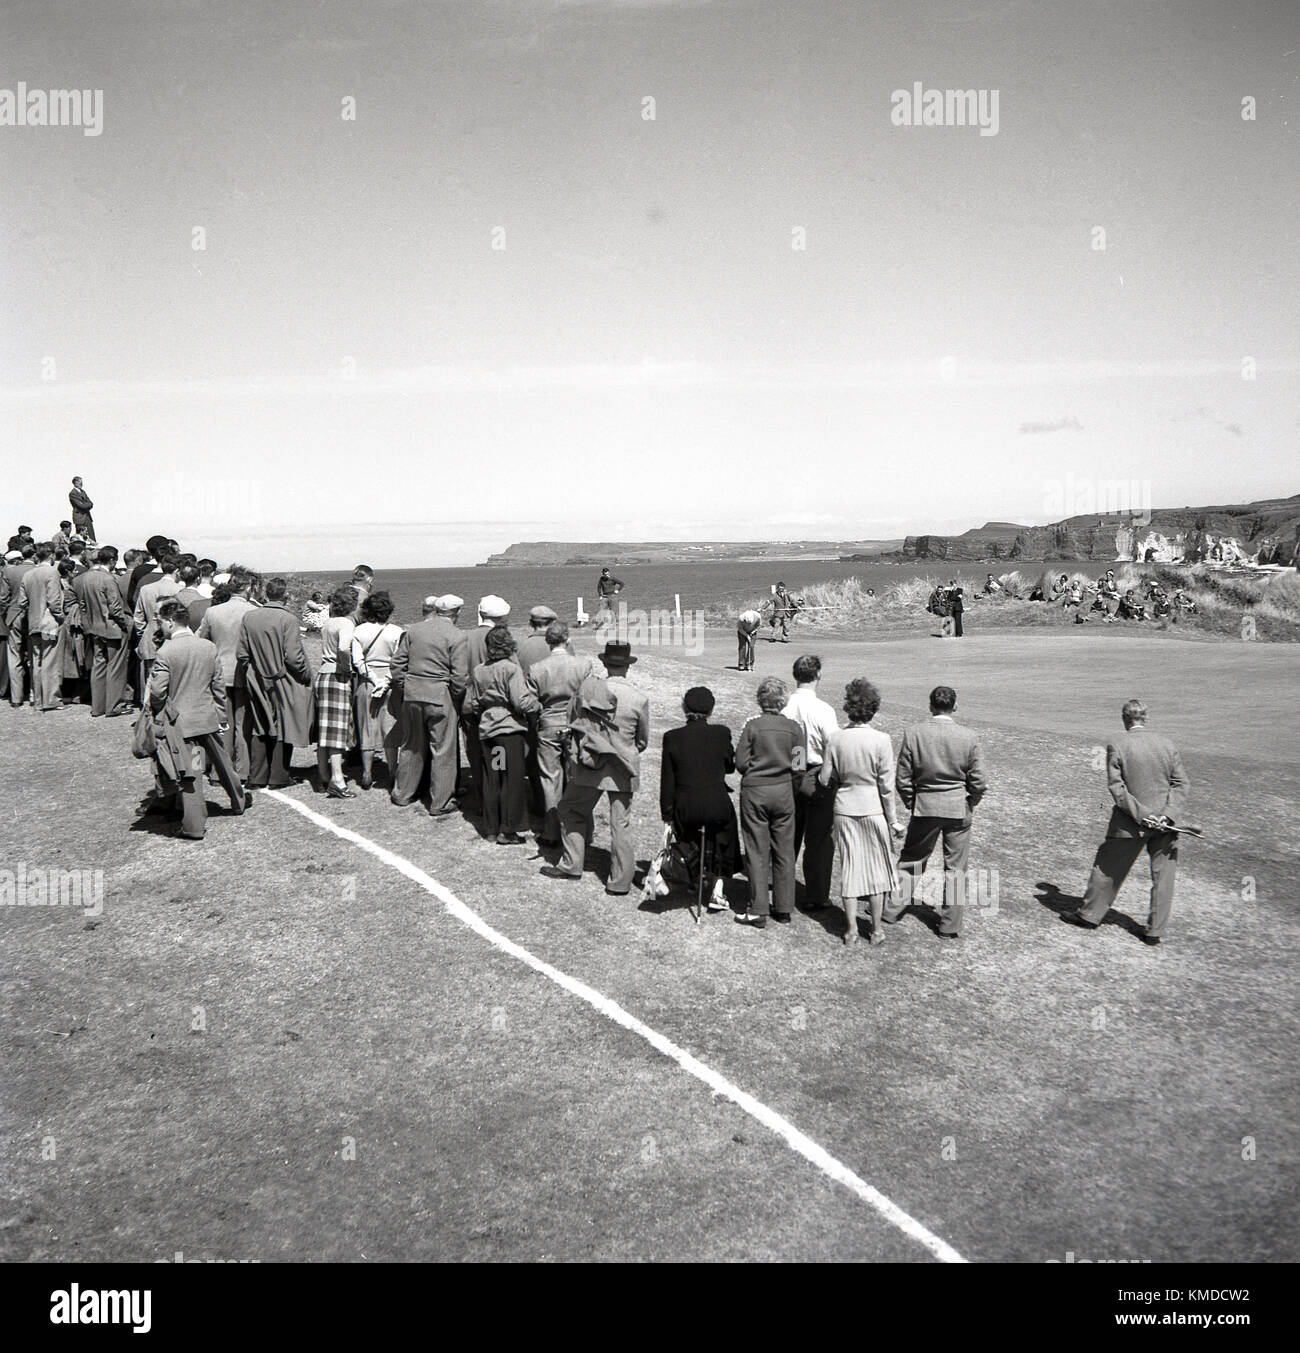 1951, historical, view of the Royal Portrush Golf Club on the Antrim coast, Northern Ireland, which this year is holding the Briitsh Open golf tournament and we see well-dressed spectators standing around a coastal green to watch the golfers putt. Now known as simply 'The Open', this event was won by English golfer Max Faulkner, his single major victory. Stock Photo